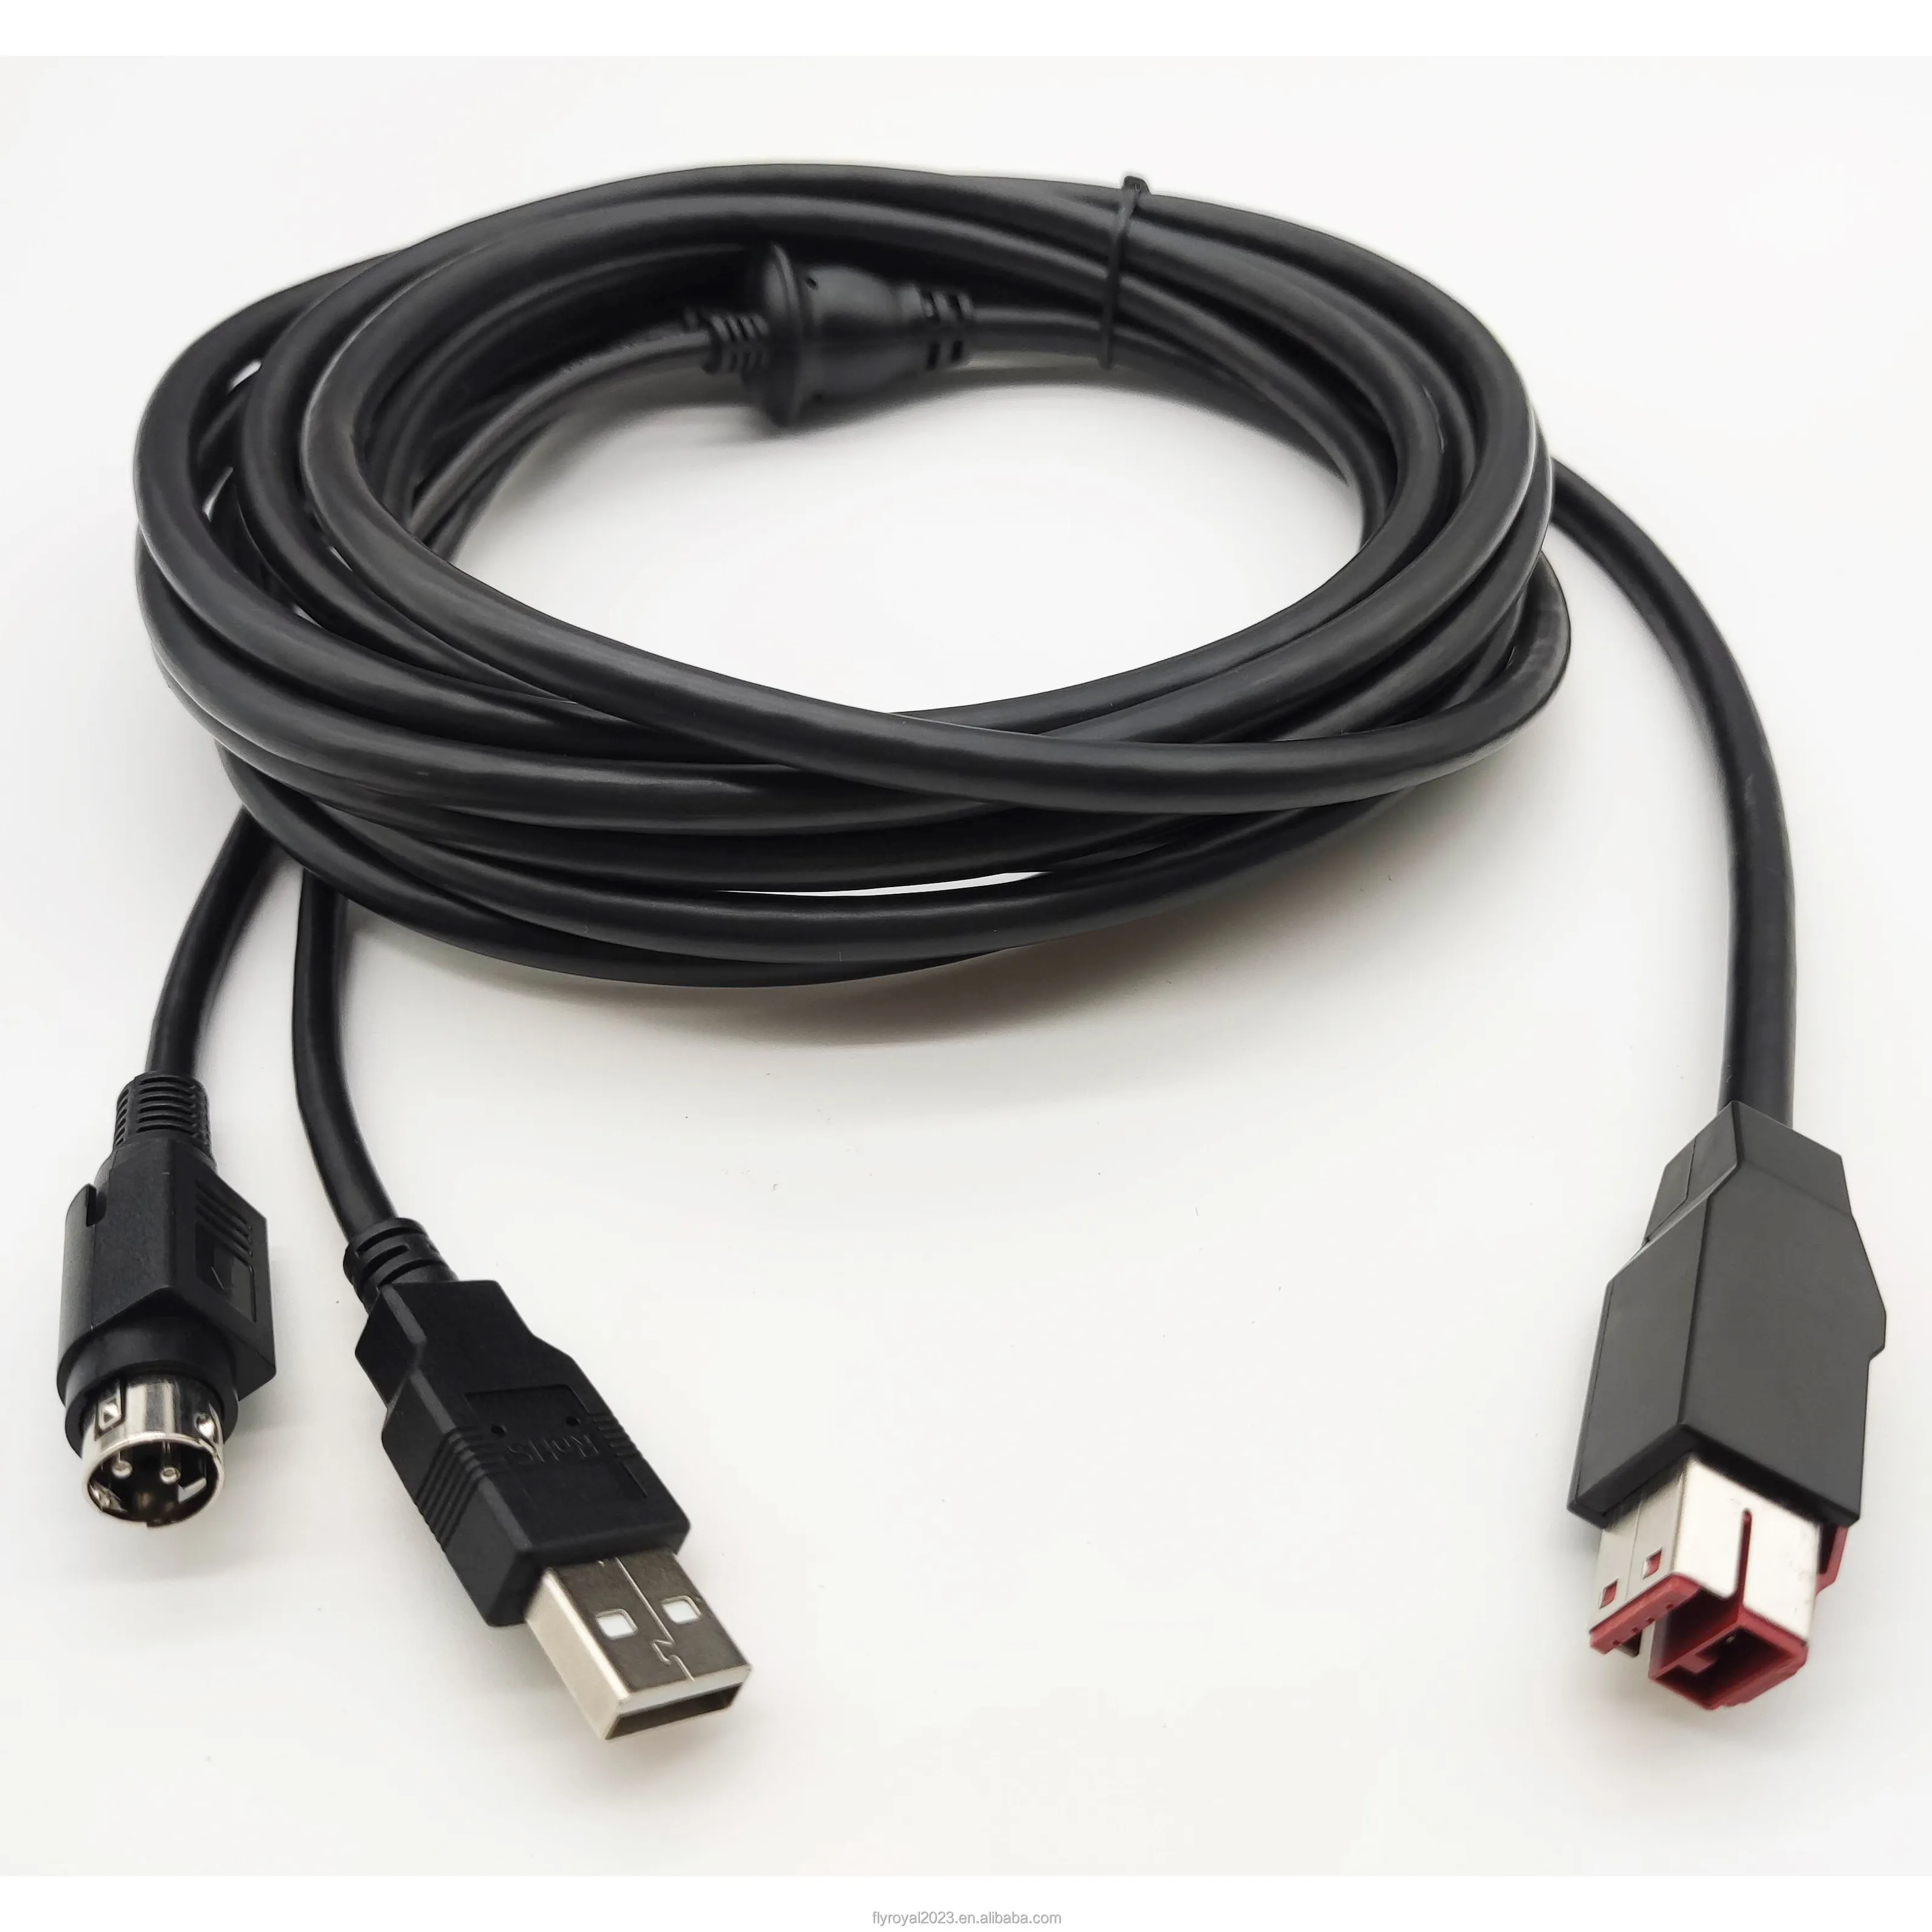 24V powered USB cable 24V to hosiden and USB-B poweredUSB cable